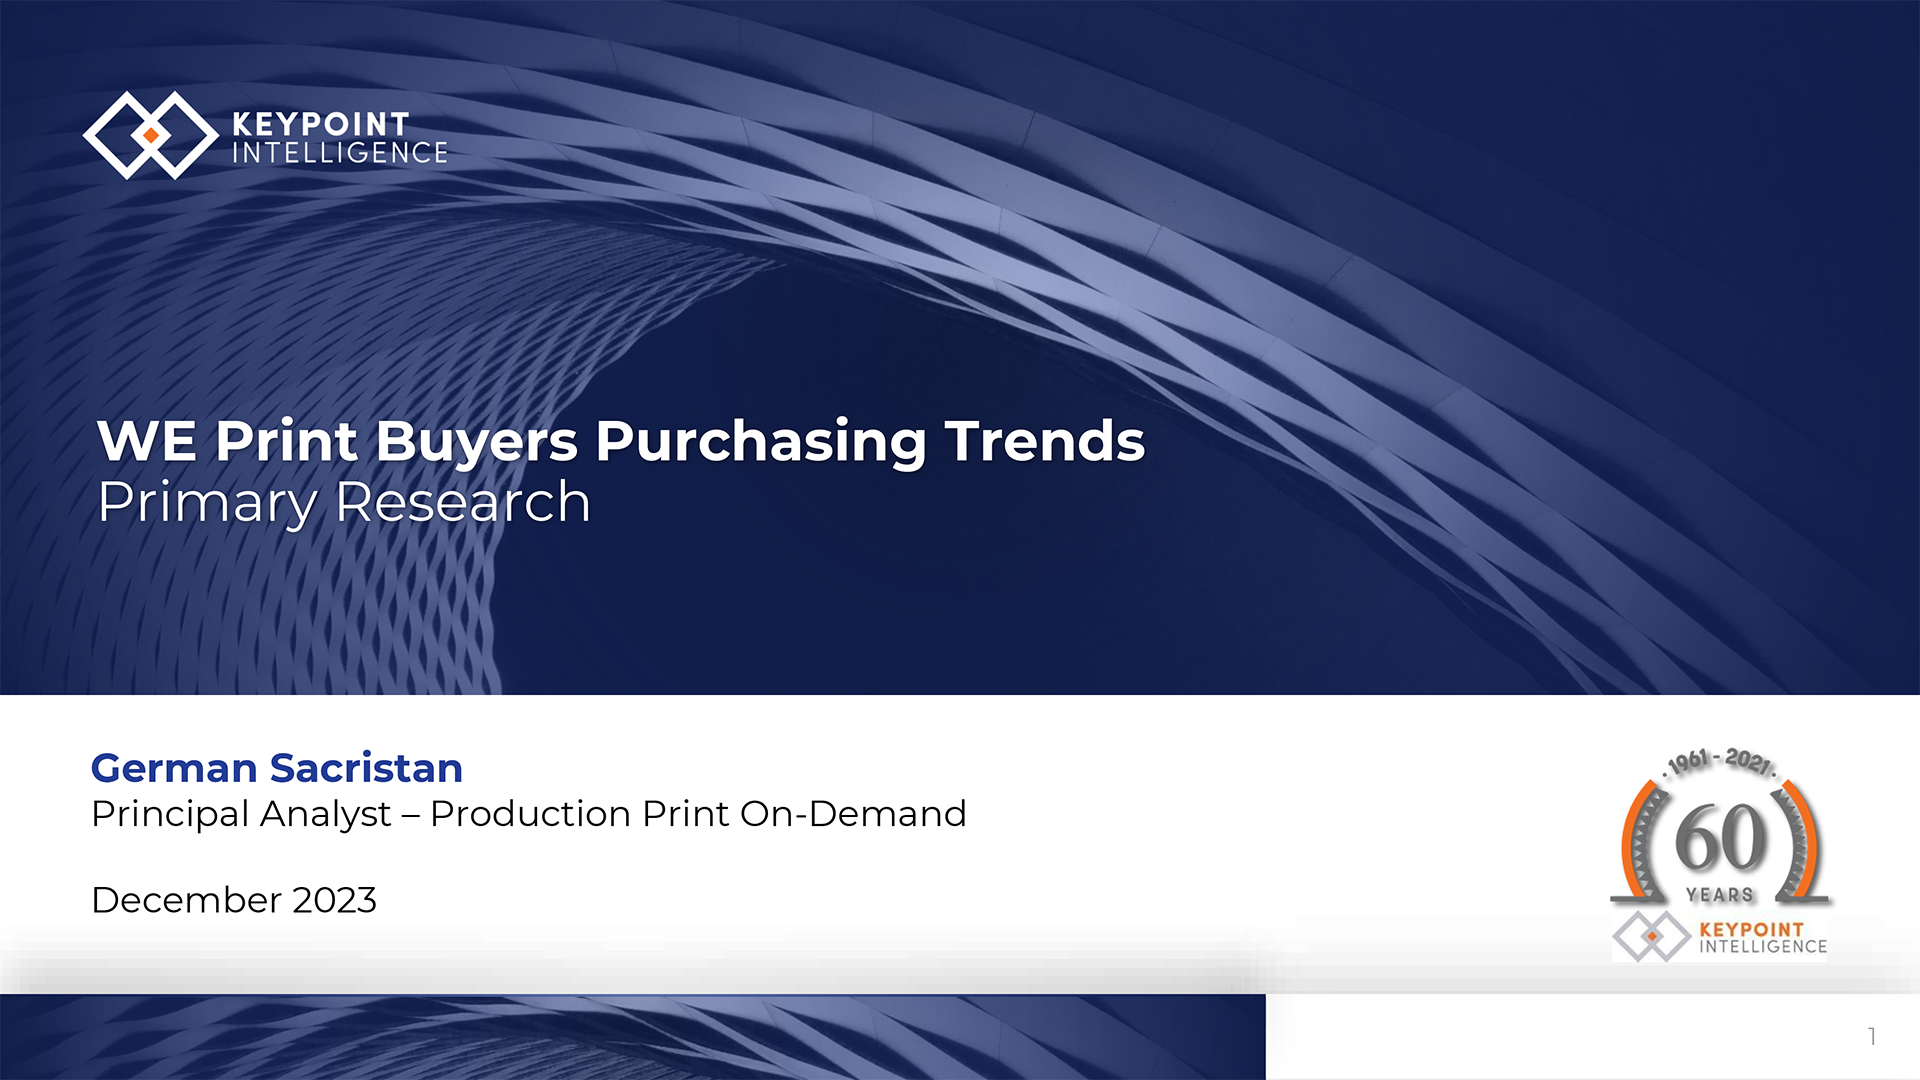 Print Buyers Purchasing Trends, Keypoint Intelligence